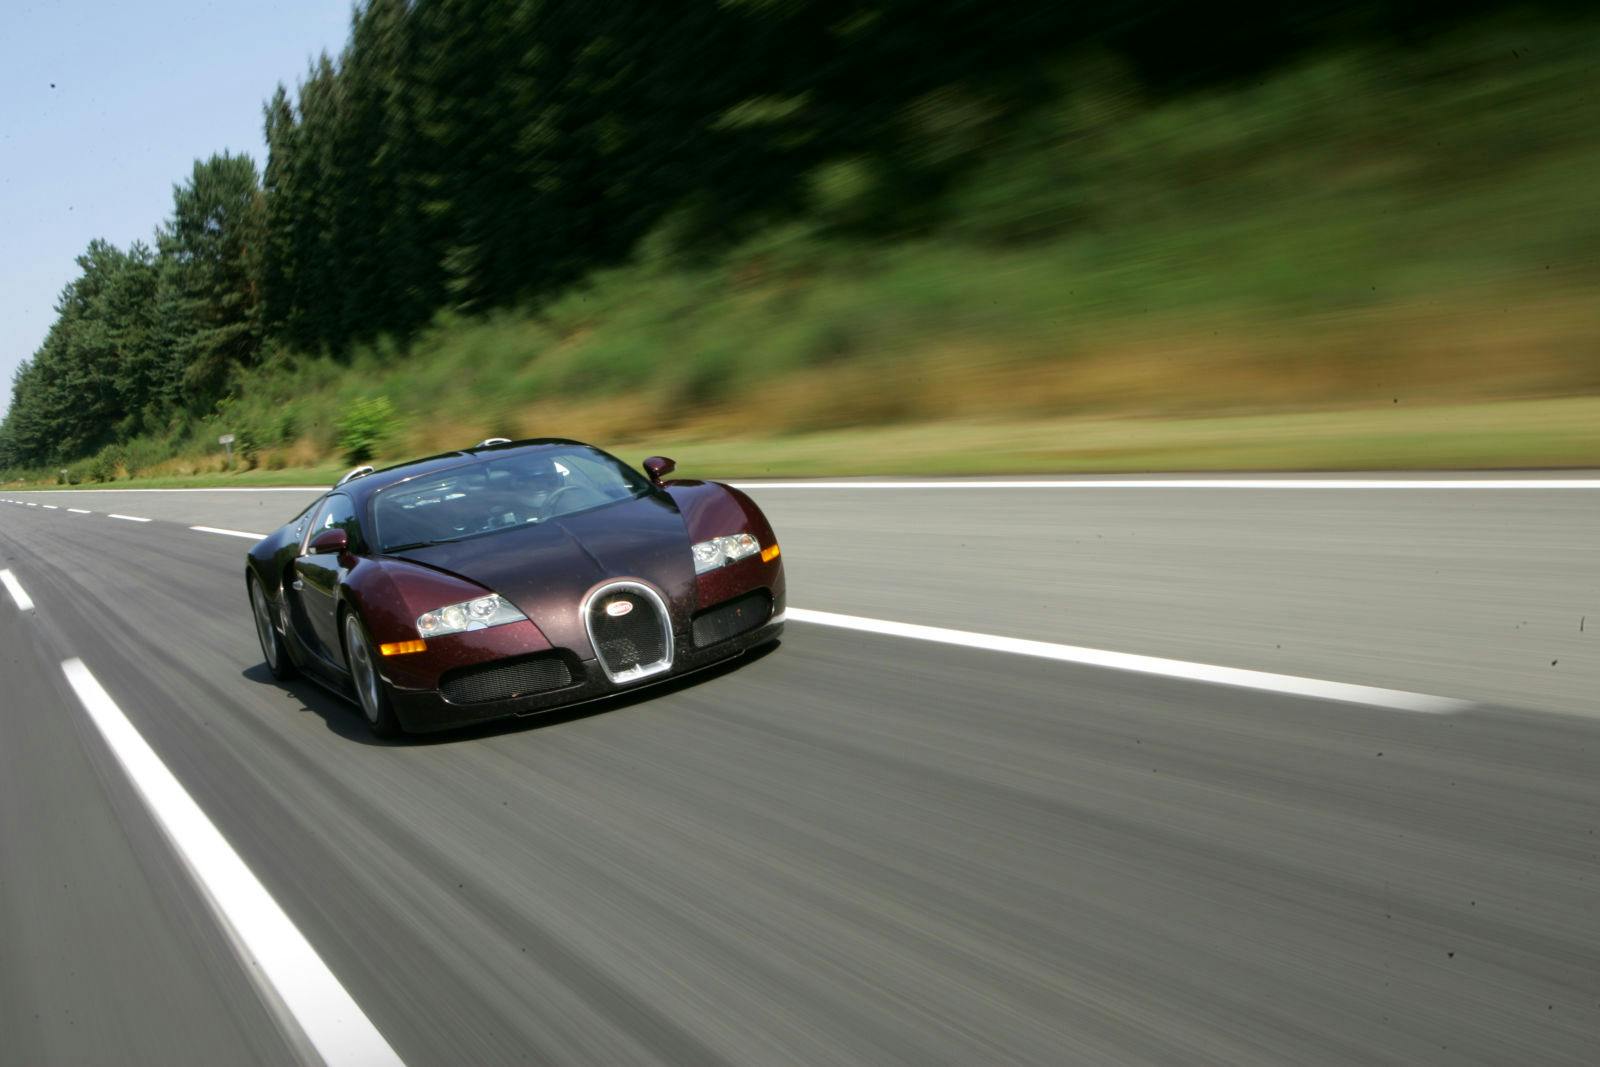 15 years ago, the Bugatti Veyron 16.4 achieved the impossible and became the first series production car to break the 400 km/h barrier.